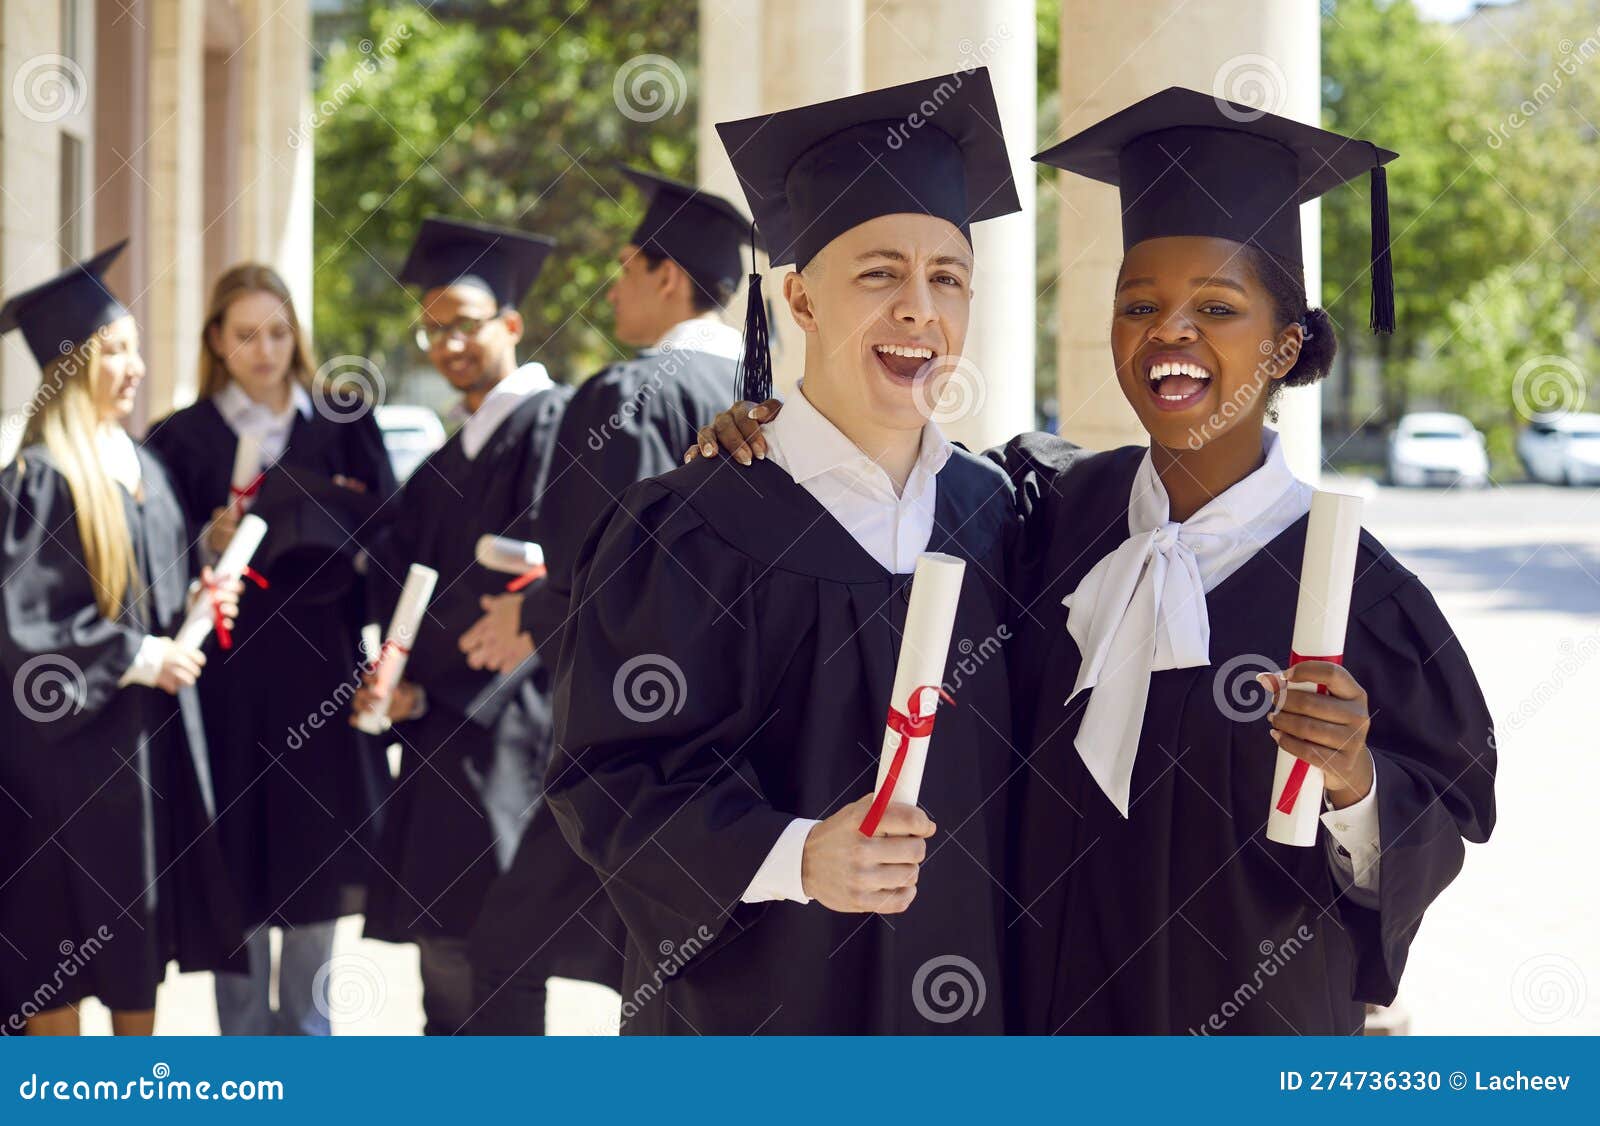 Premium Photo | Young afro american female student dressed in black graduation  gown. girl posing for a photo and holding a flowers